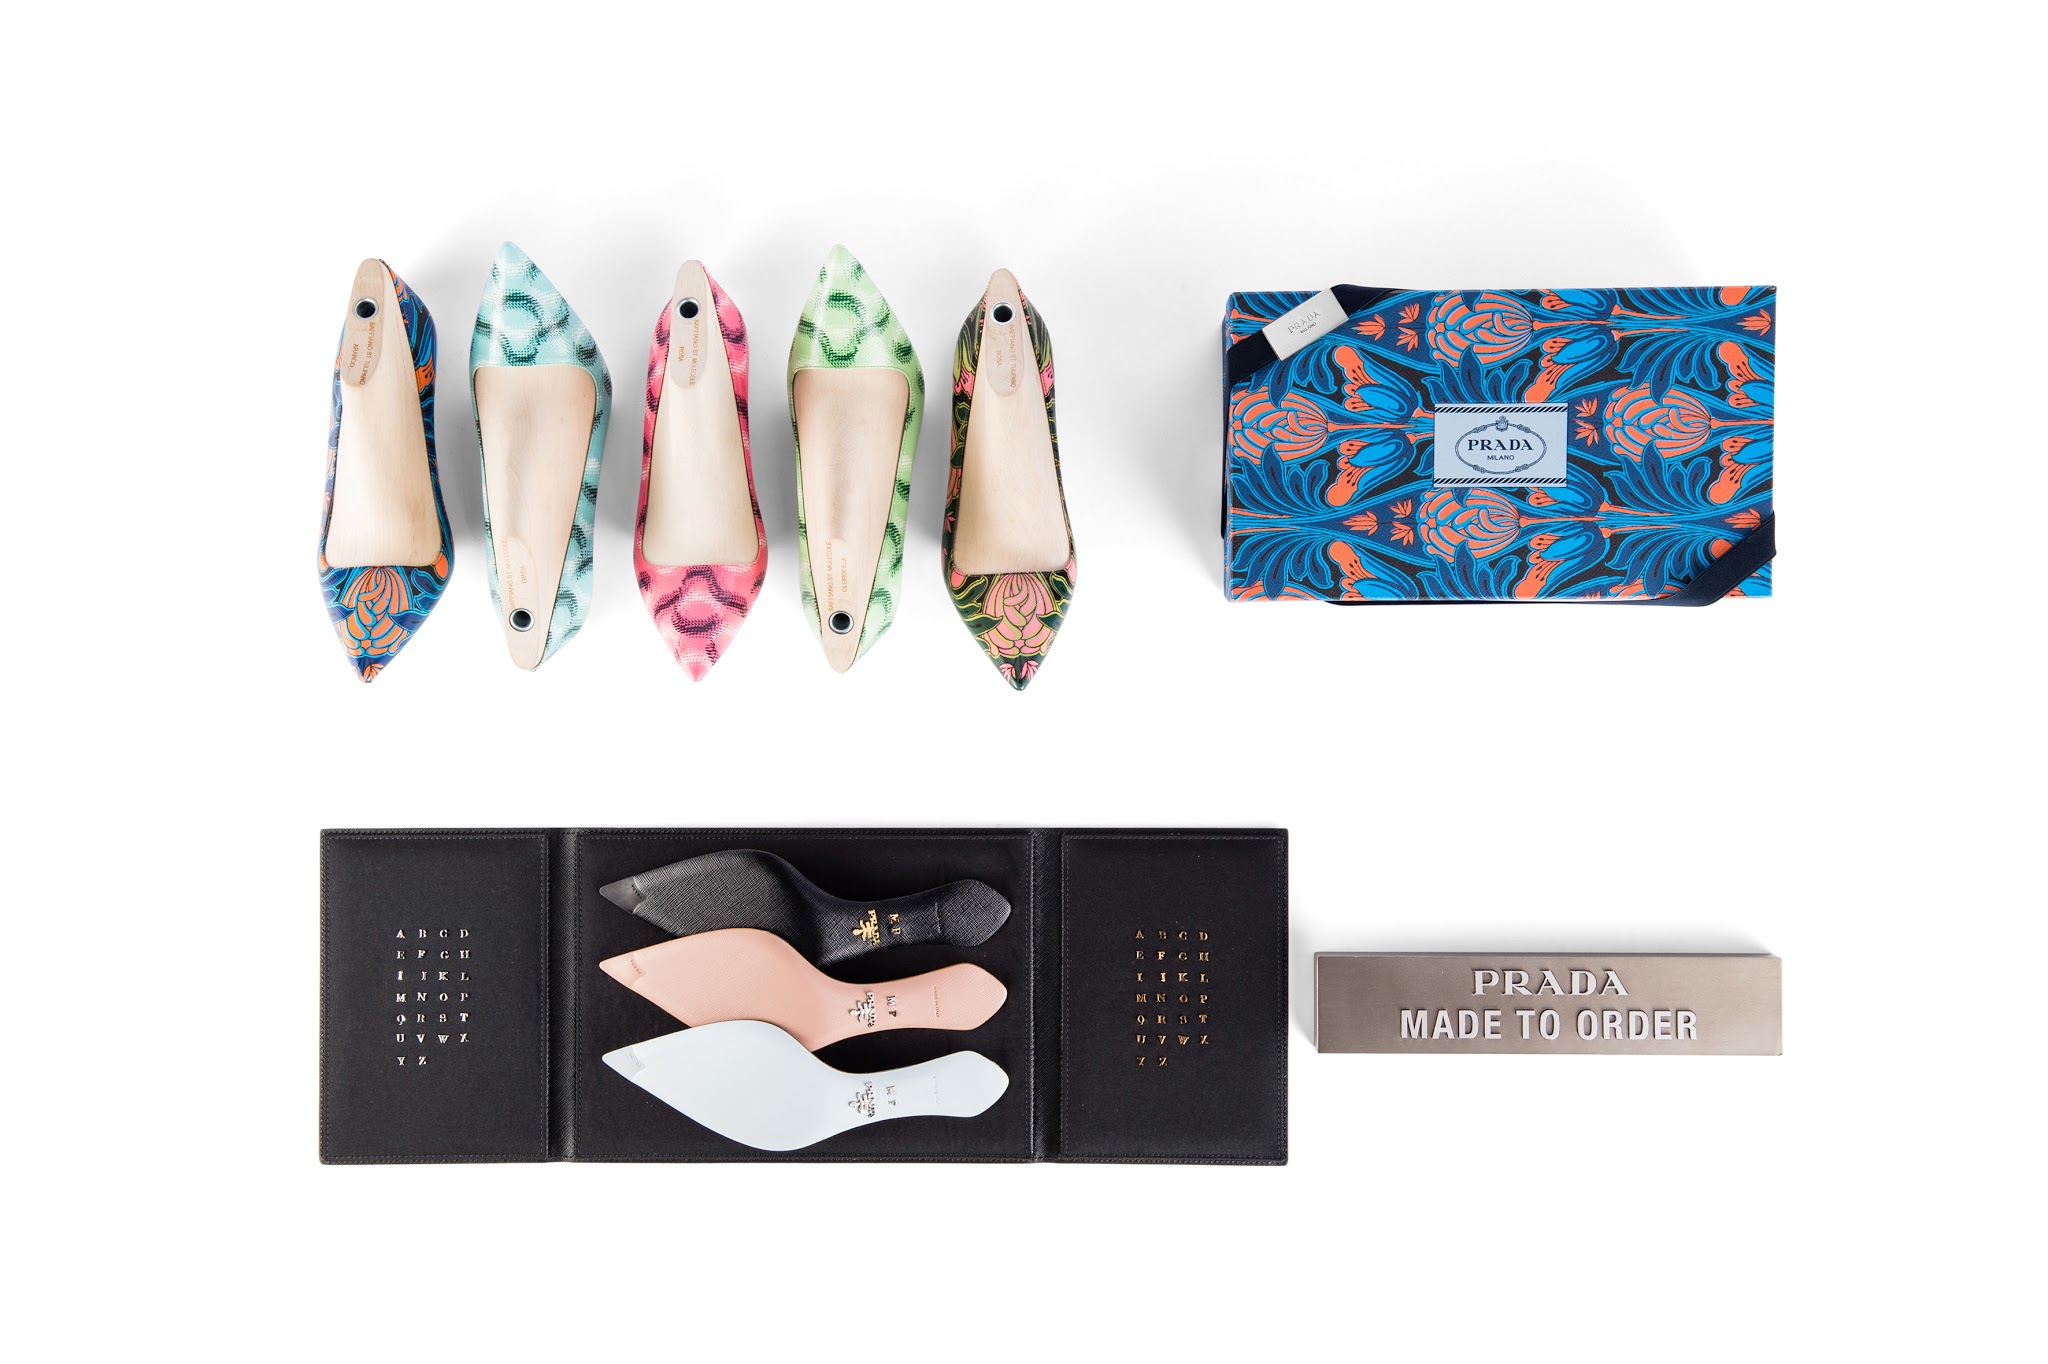 Prada's Made-to-Order Décolleté Shoes Comes to KL - BagAddicts Anonymous